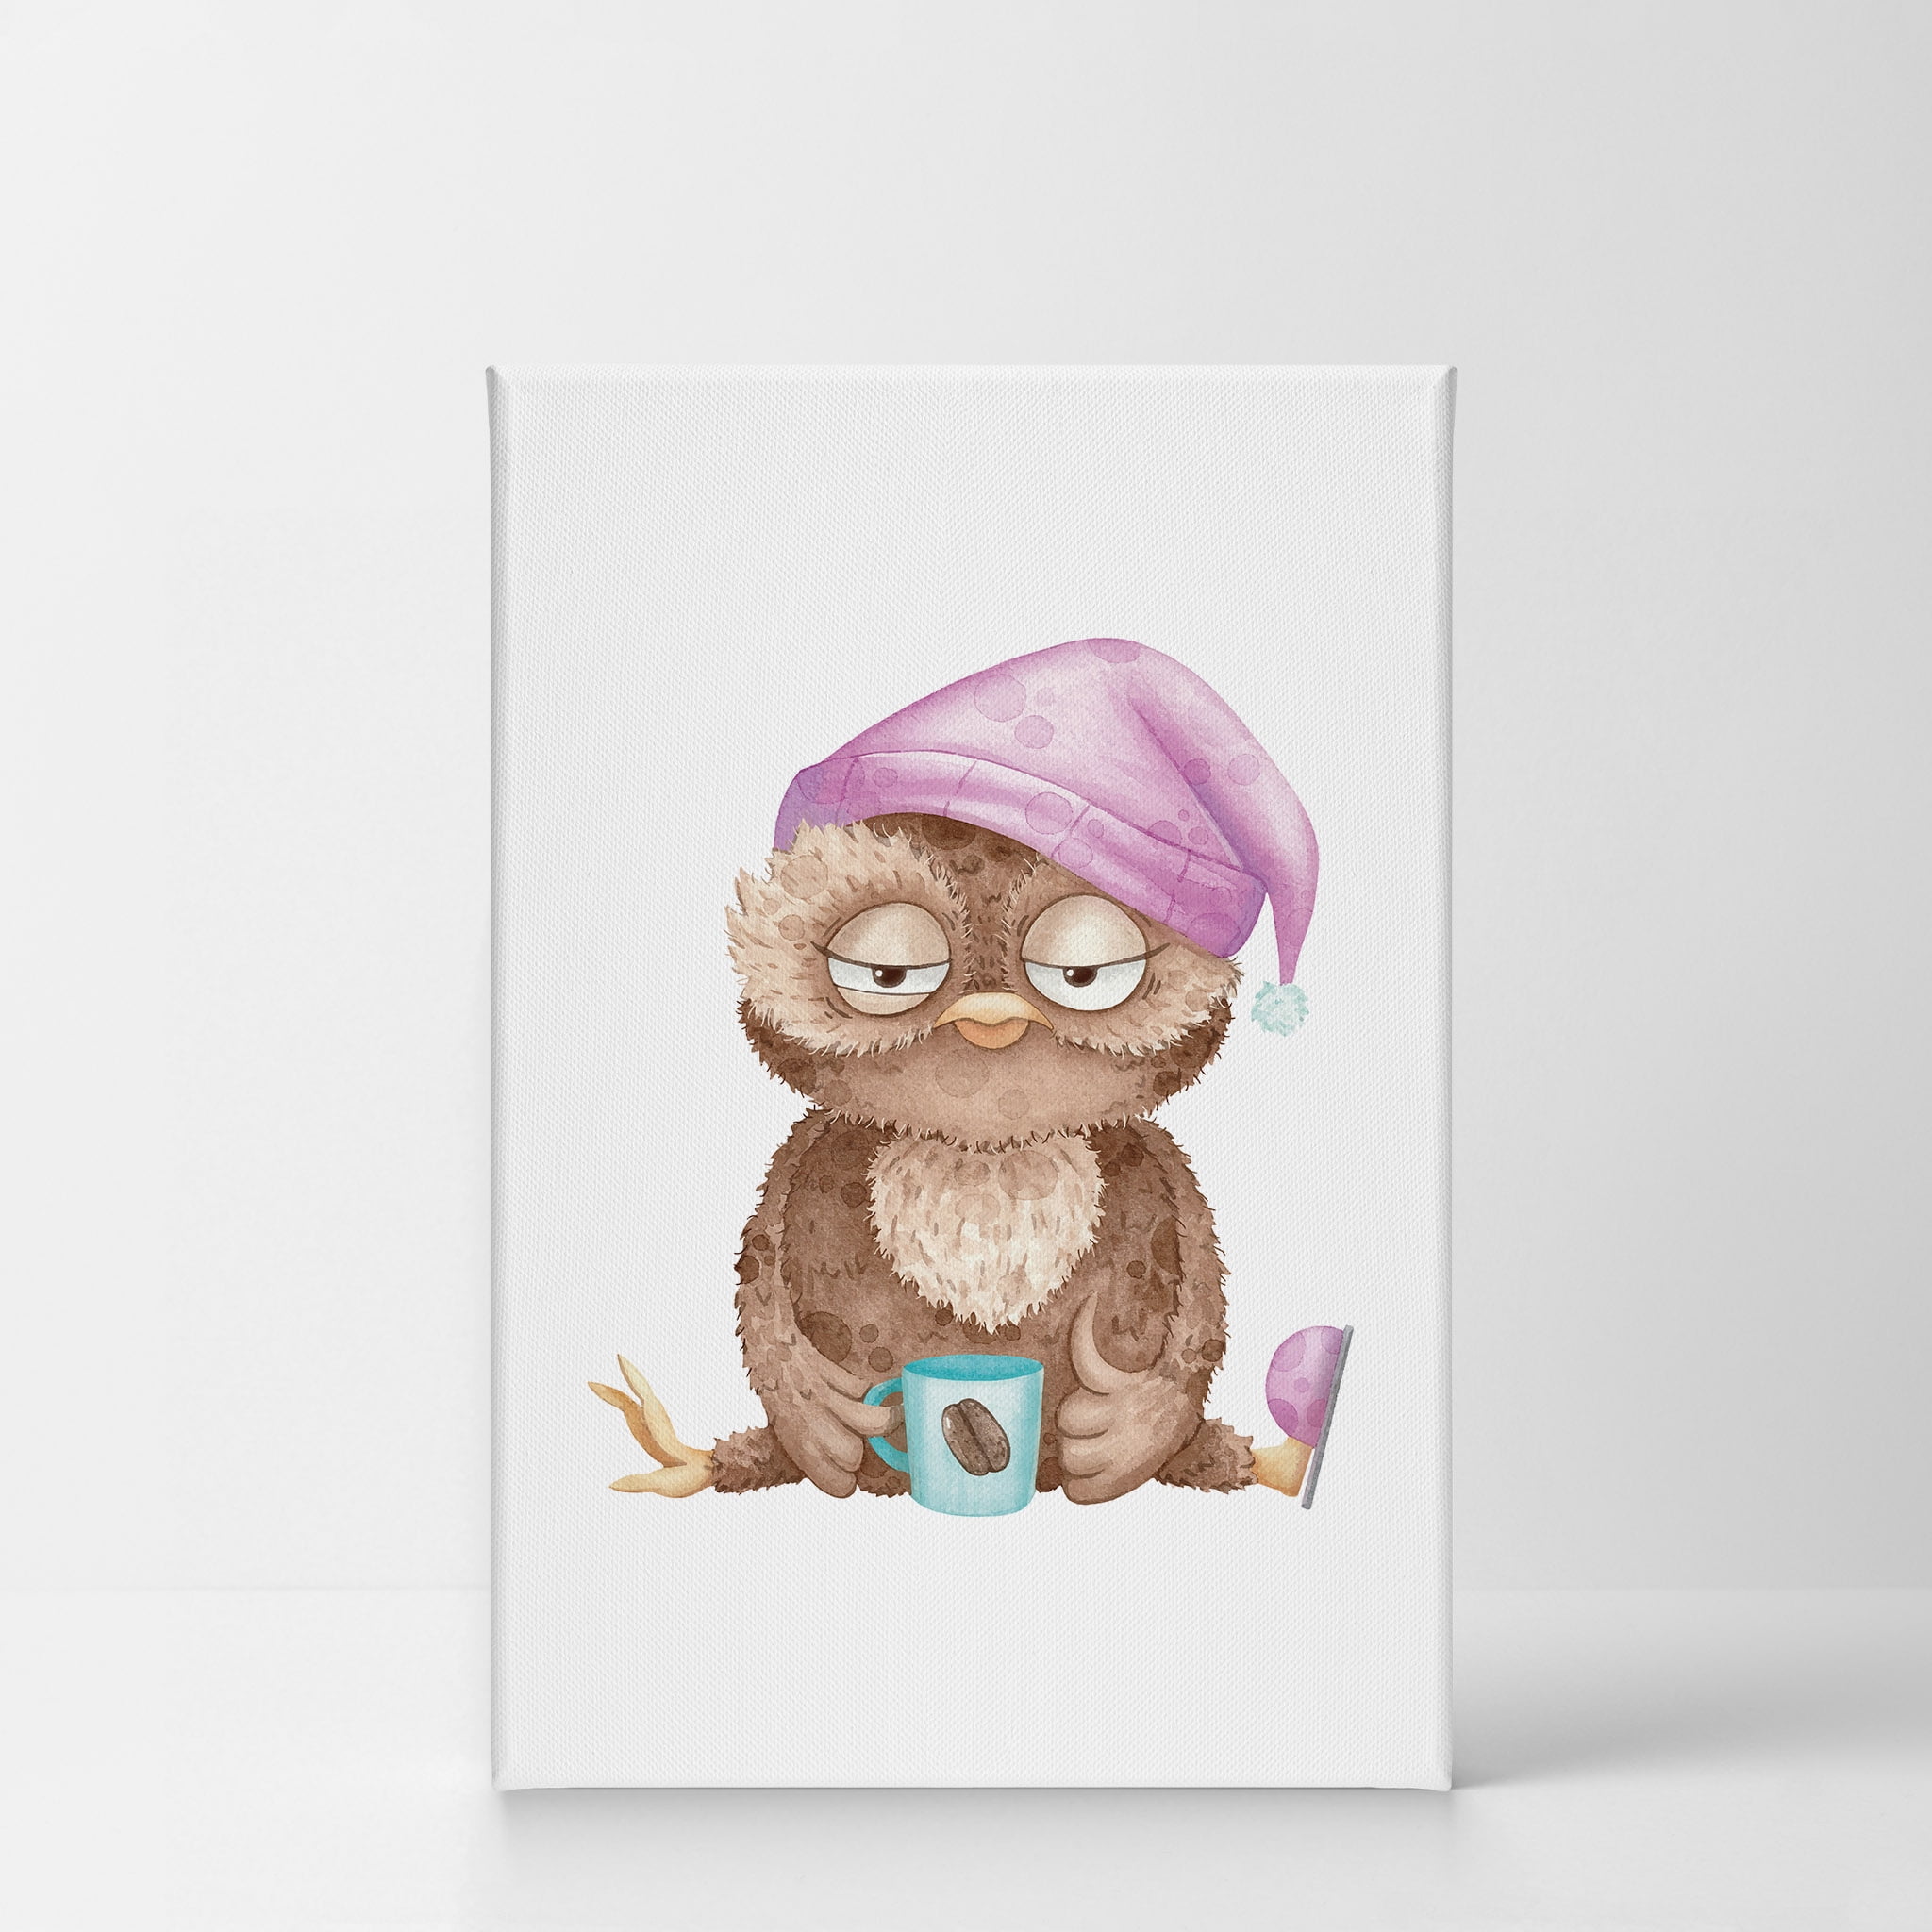 Smile Art Design Pretty Sleepy Owl With Cup Of Coffee Watercolor Painting Illustration Animal Canvas Wall Art Print Living Room Bedroom Kids Girl Boy Baby Nursery Room Decor Ready To Hang